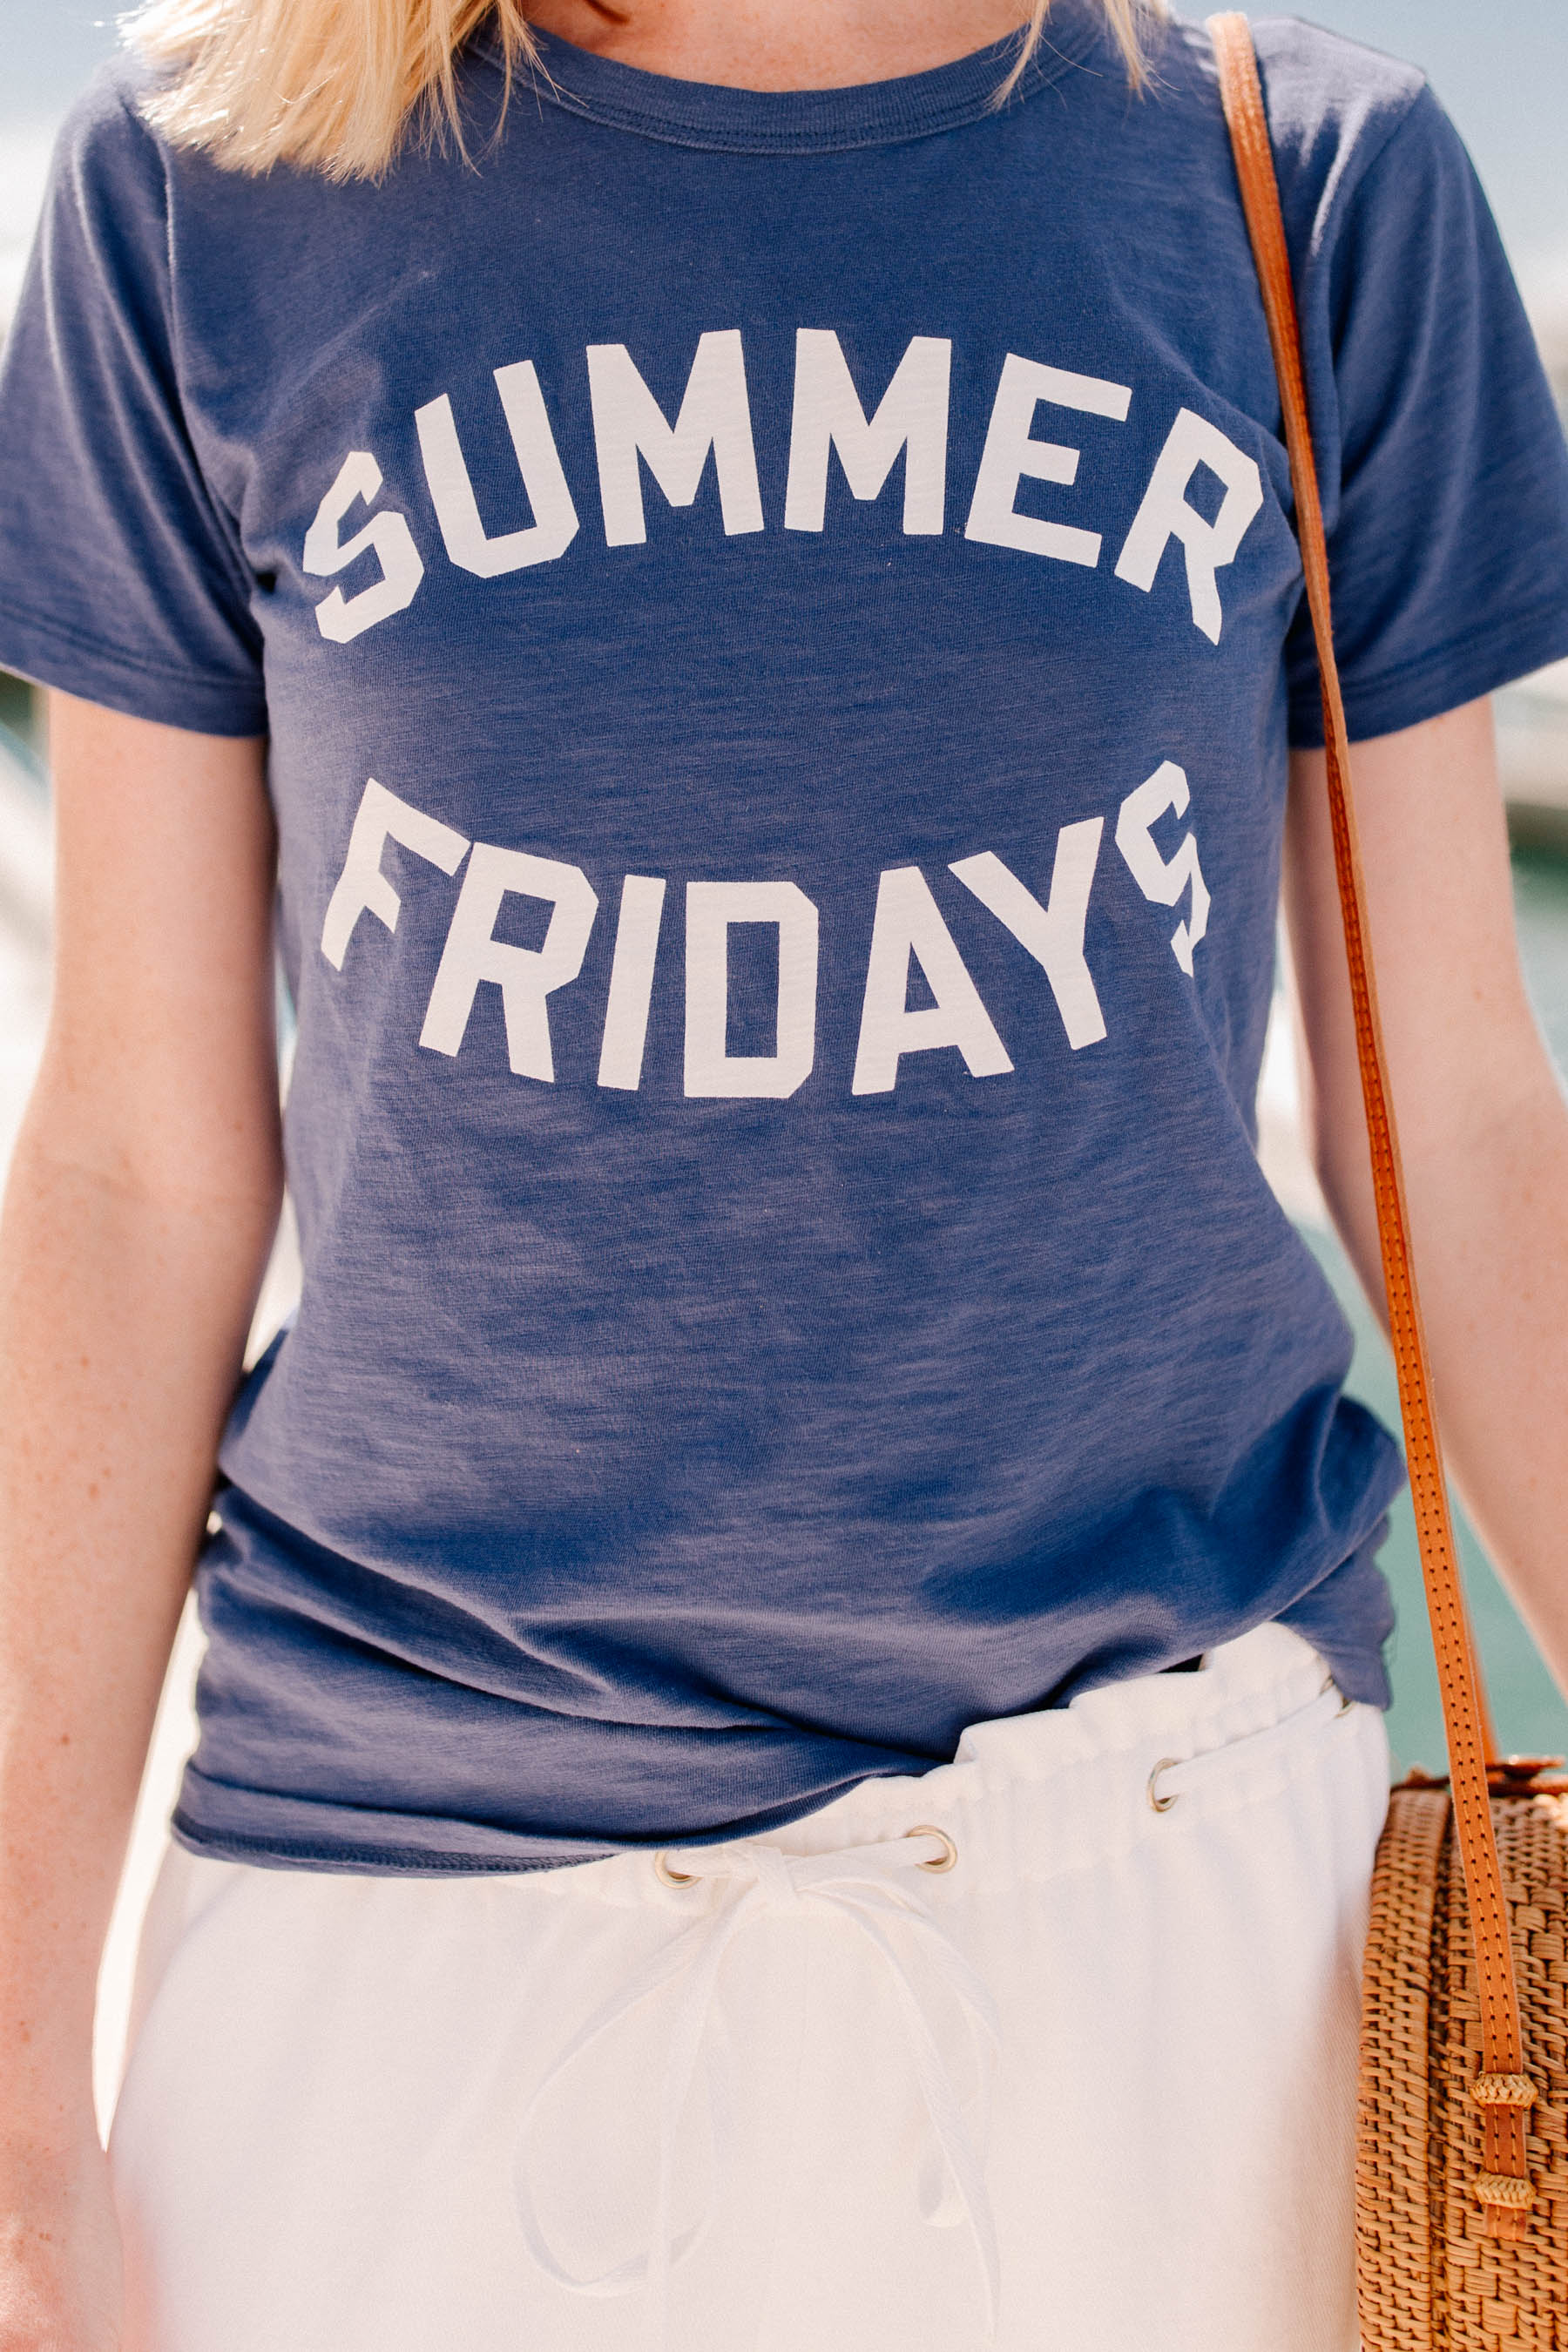 J. Crew Summer Friday  - Kelly in the City